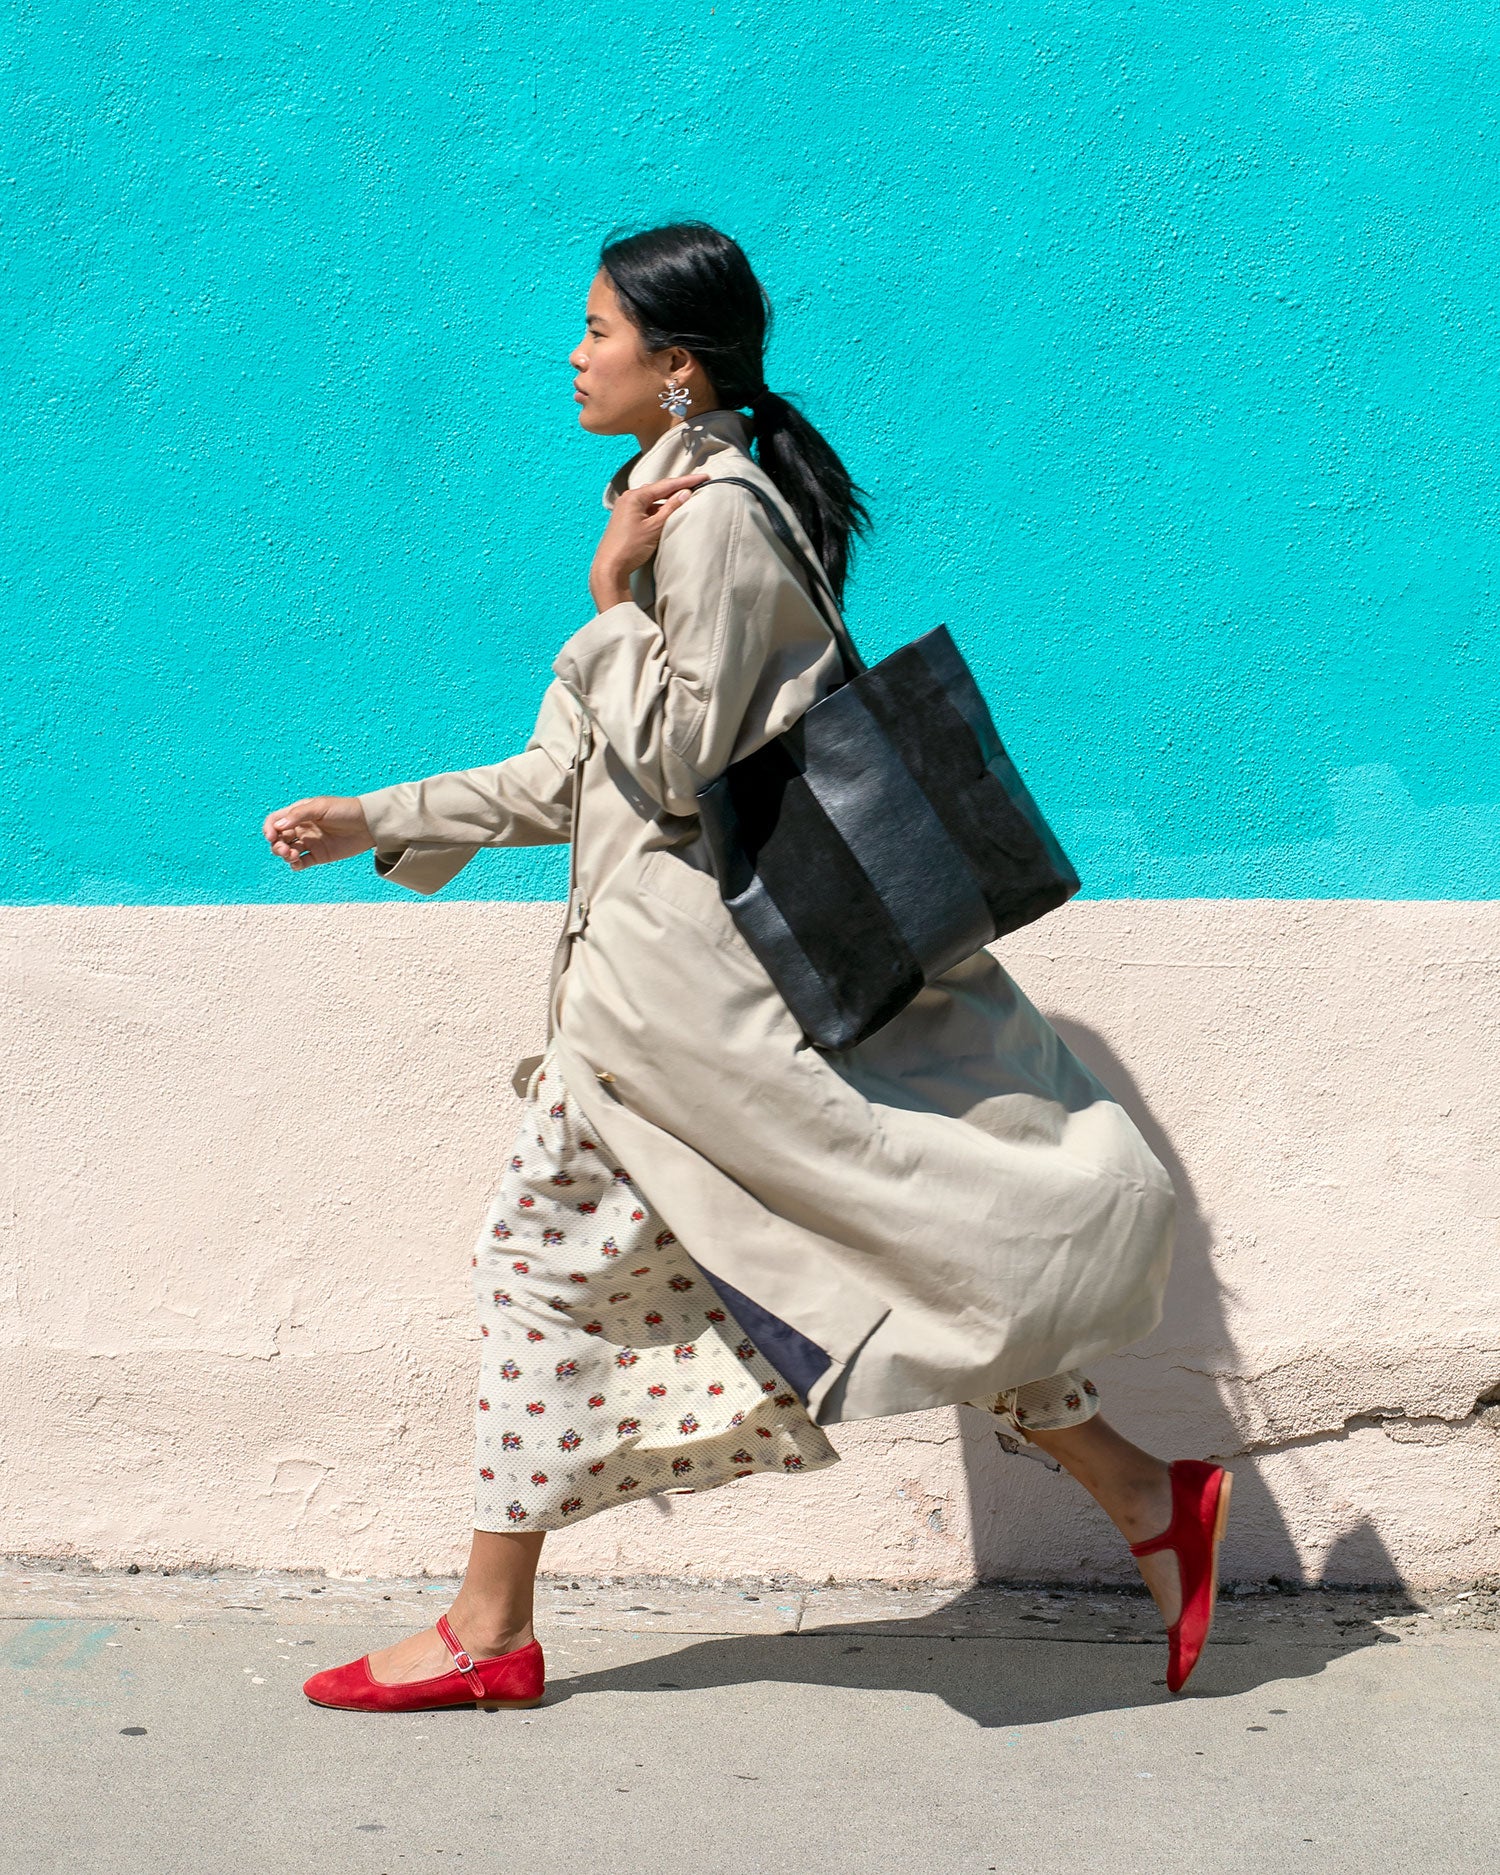 Sandra walking with the Black Suede & Nappa Bande Tote on her shoulder